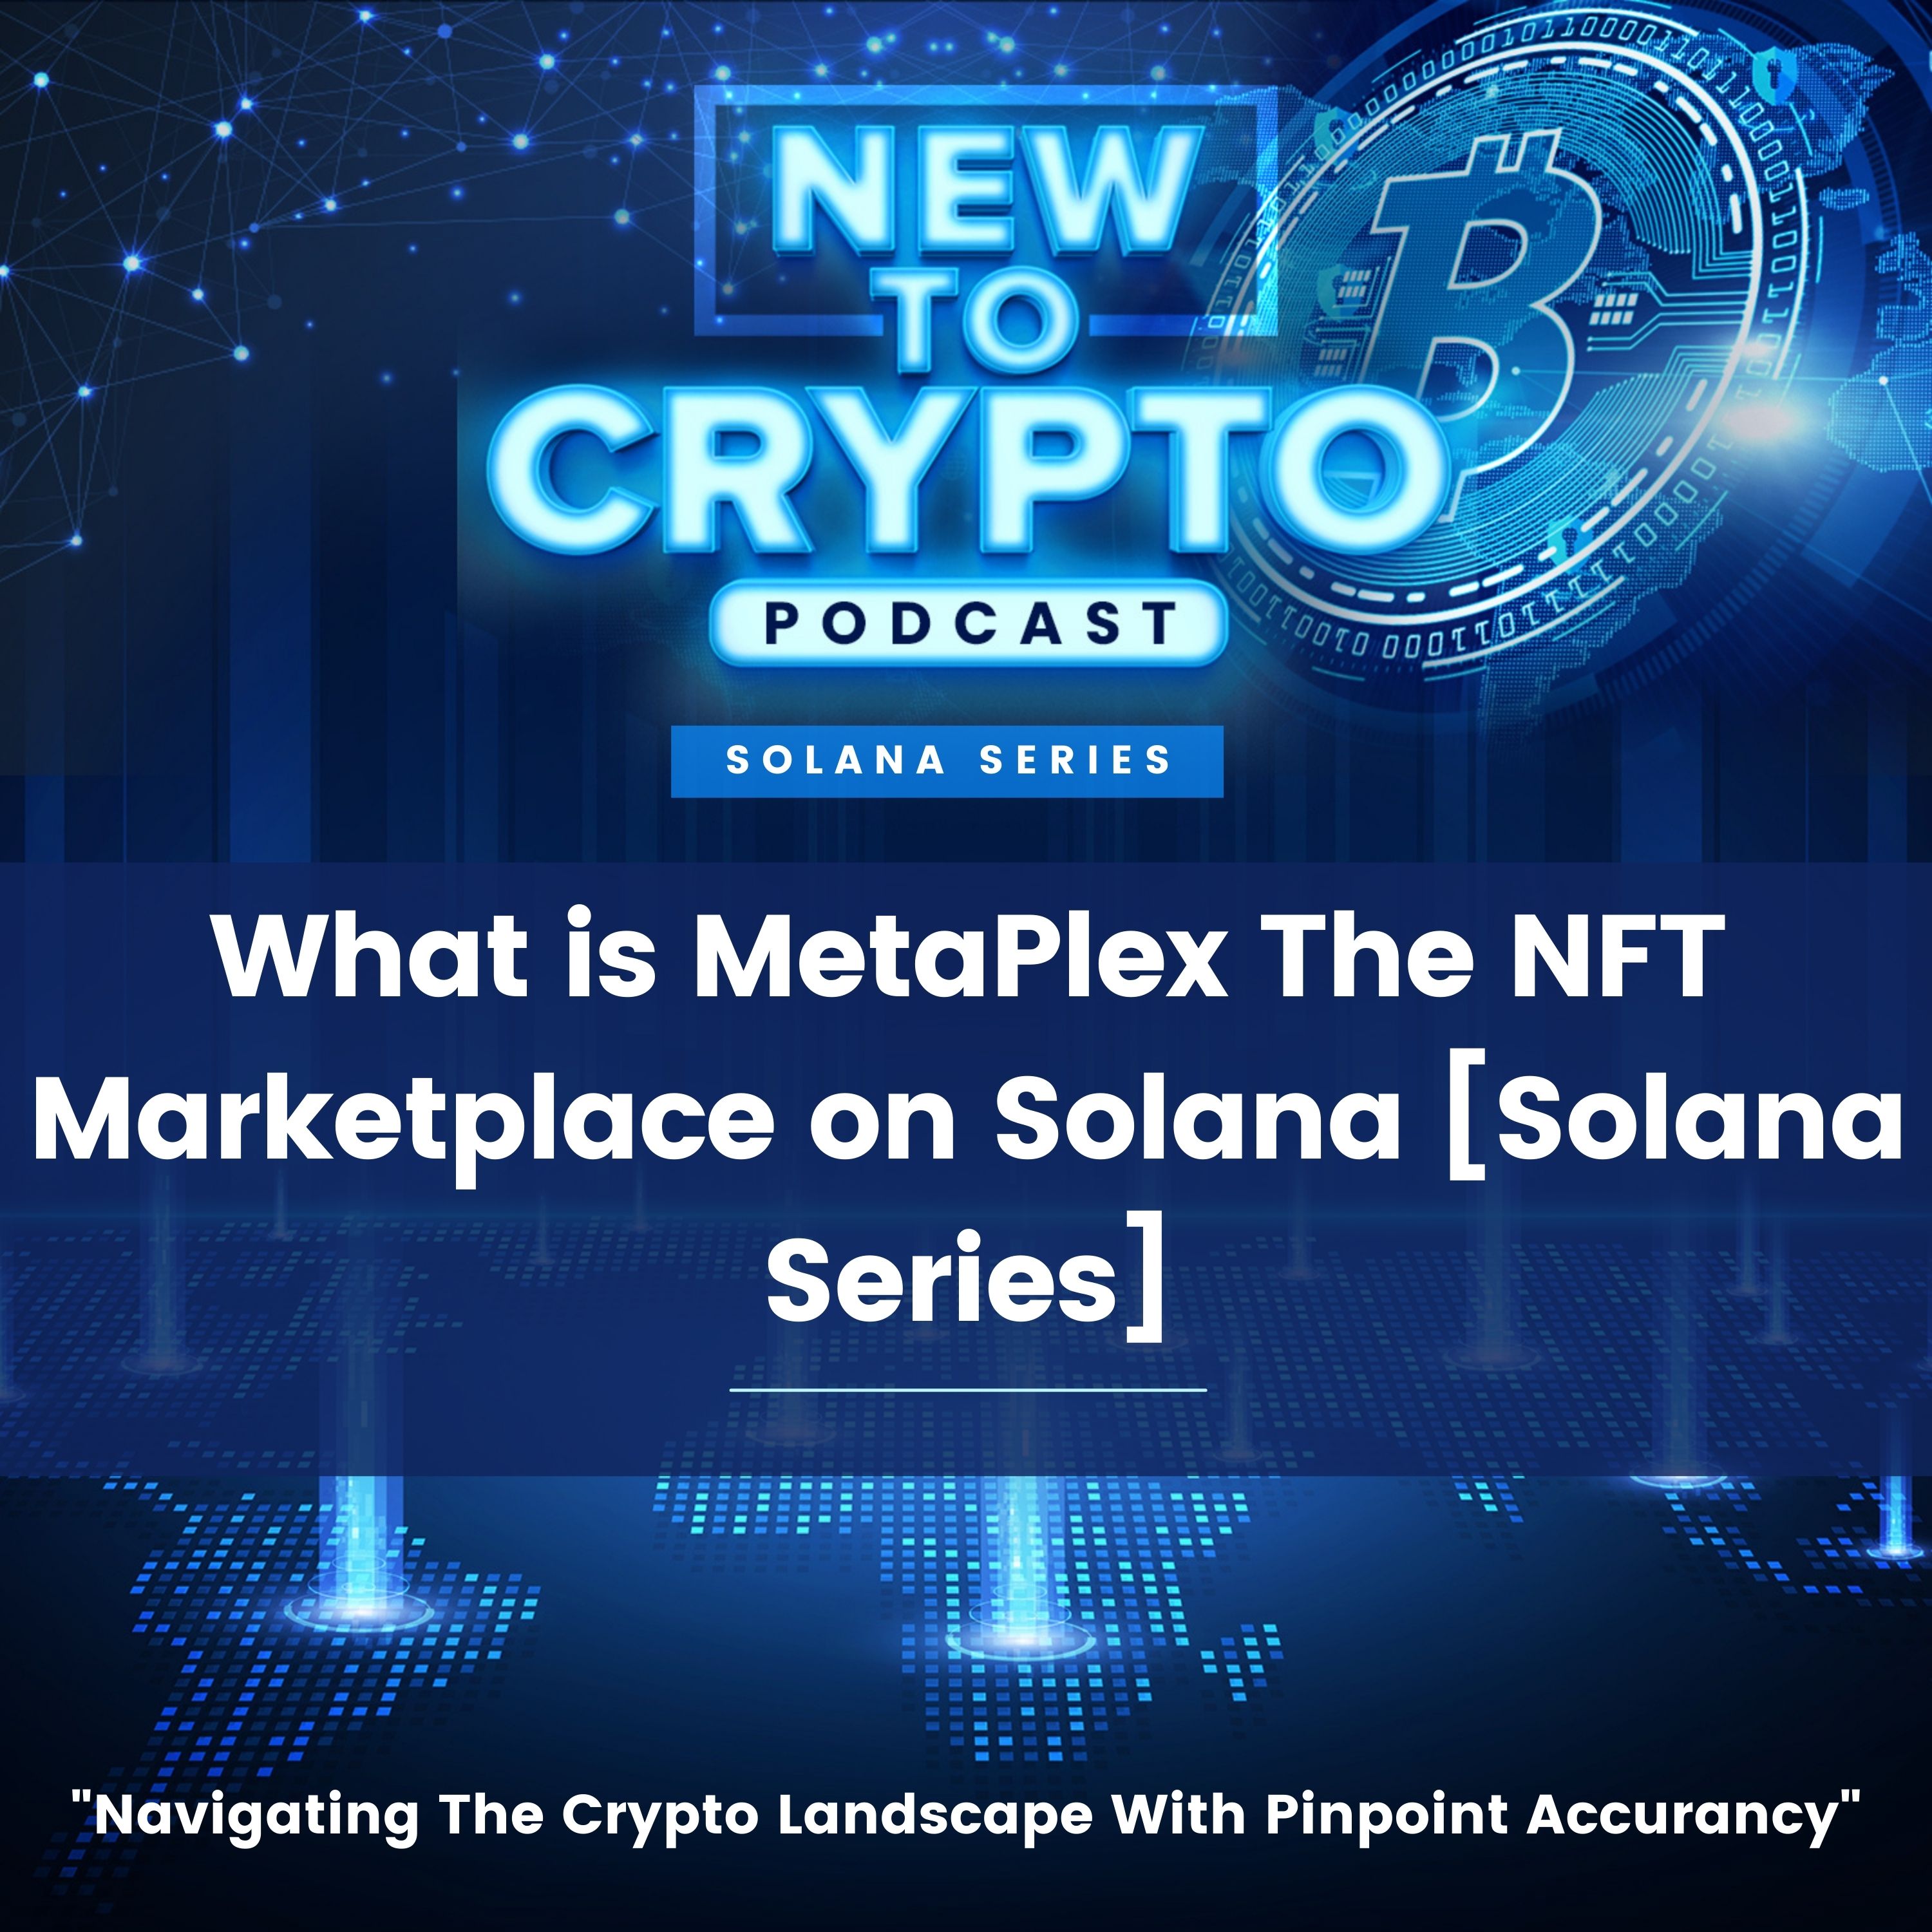 What is MetaPlex The NFT Marketplace on Solana [Solana Series]